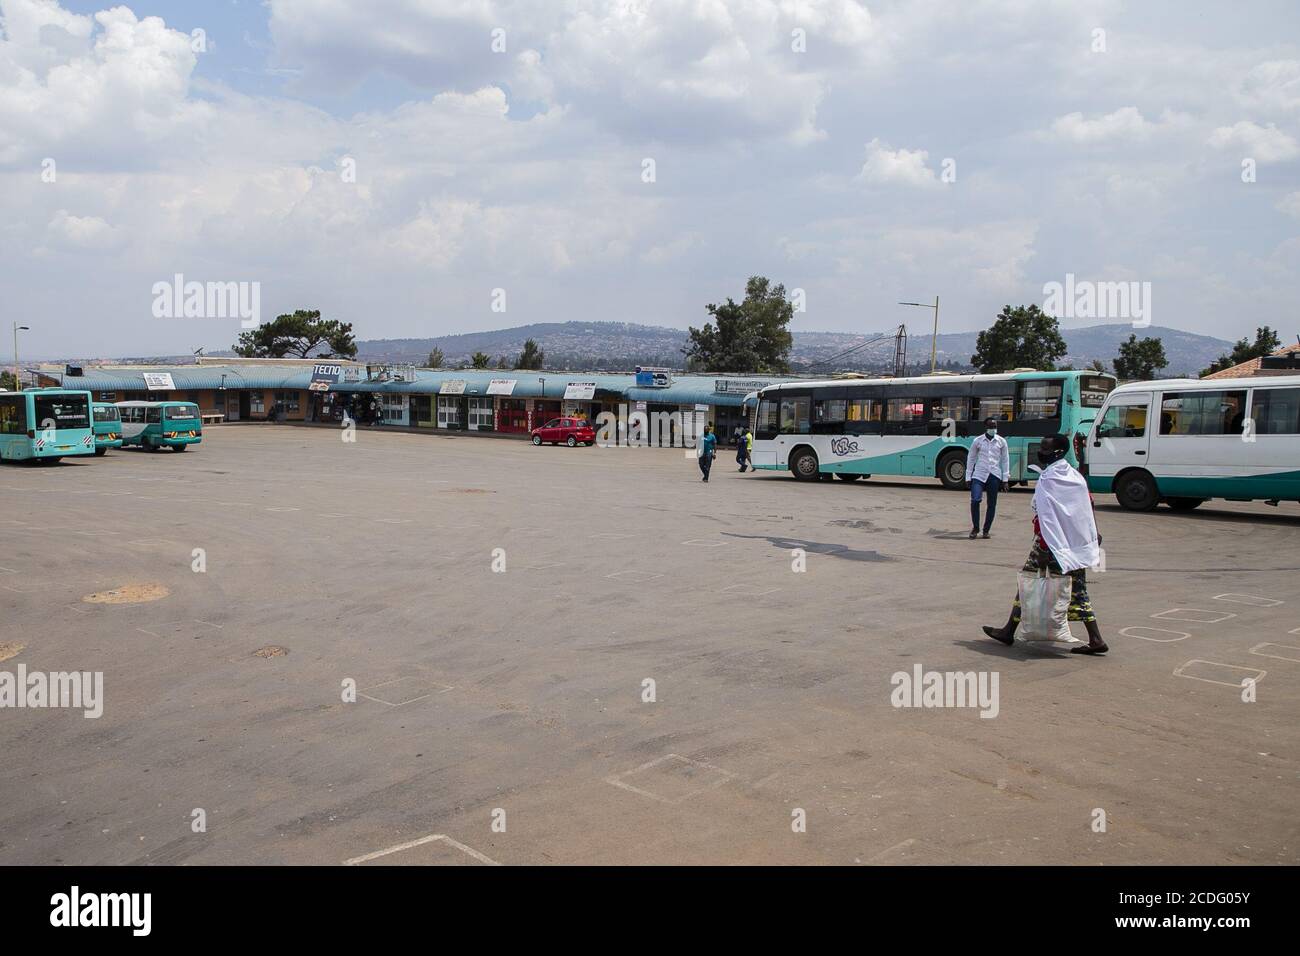 Kigali, Rwanda. 27th Aug, 2020. People wearing face masks are seen at a bus station in Kigali, Rwanda, on Aug. 27, 2020. Rwanda has reinforced efforts to contain the spread of COVID-19 in response to a recent spike in infections. Credit: Cyril Ndegeya/Xinhua/Alamy Live News Stock Photo